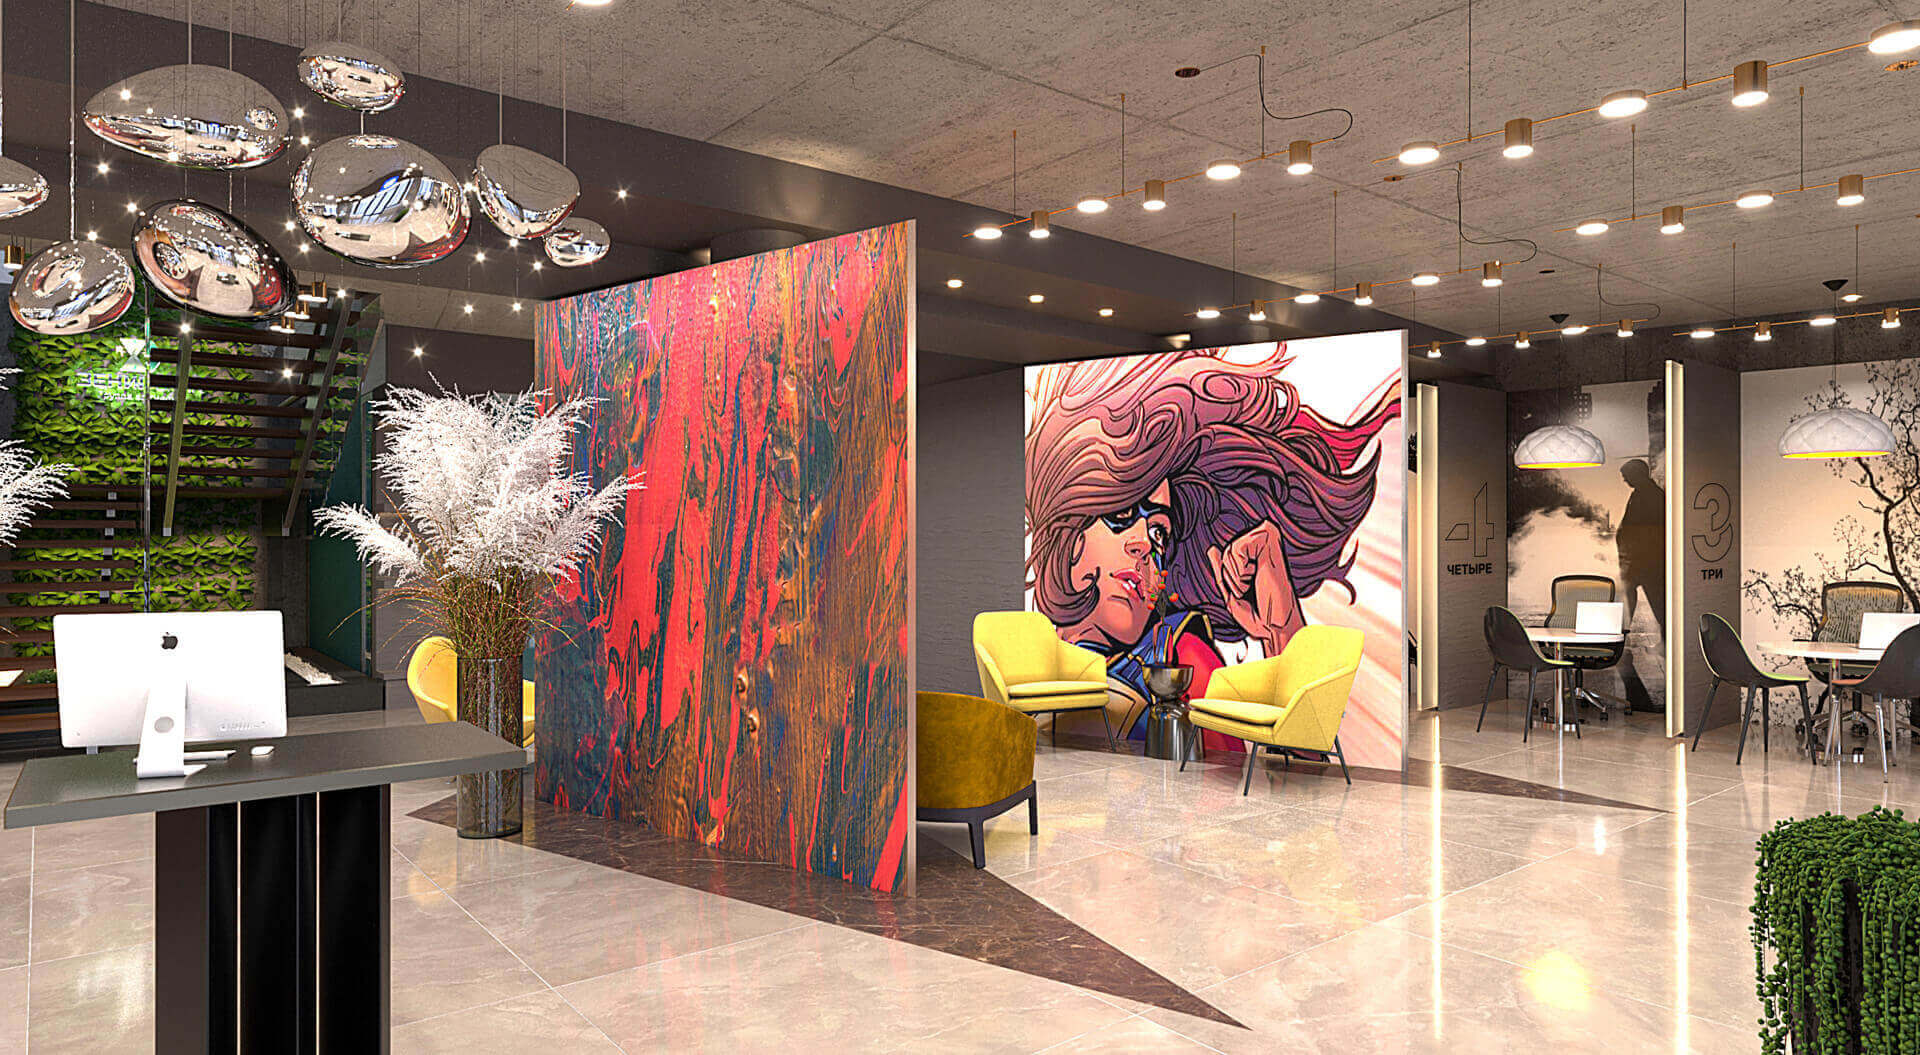 Zenit Bank Russia, Retail Interior Design, Reception Point, Waiting Area and Wall Graphics - CampbellRigg Agency